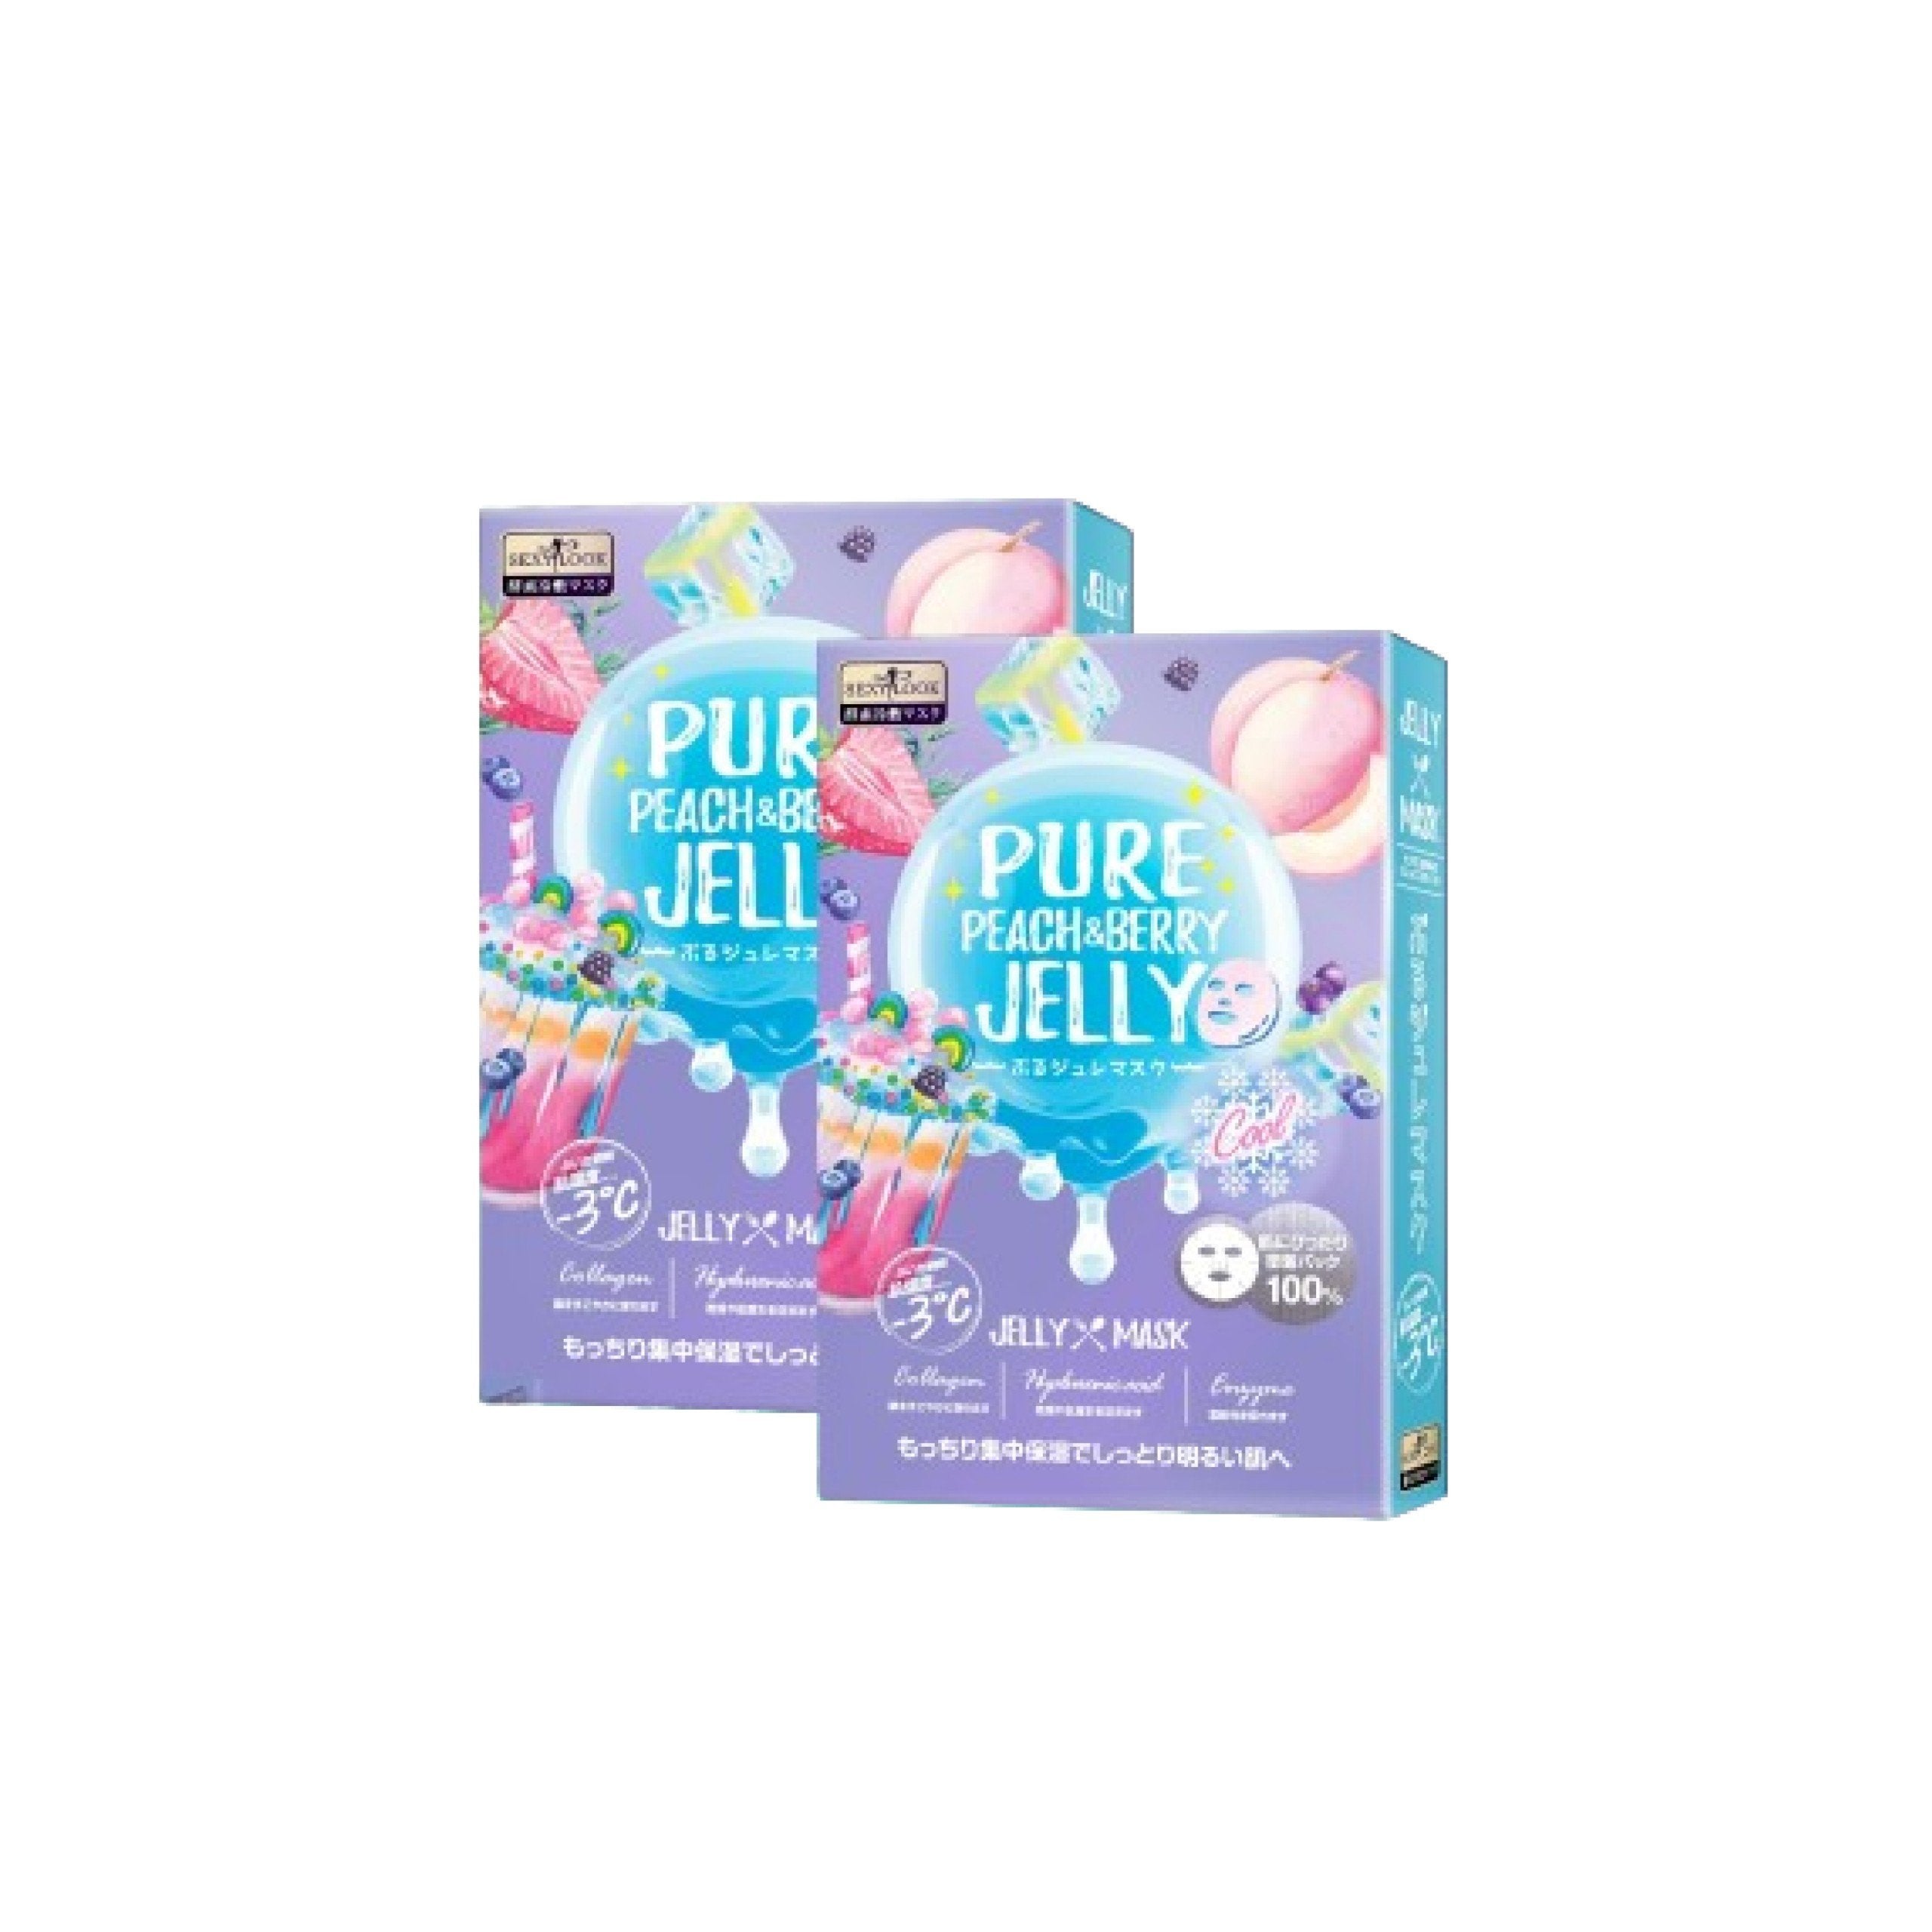 Combo of 2 Boxes of Jelly Mask to Help Reduce Acne Oil and Moisturize Skin